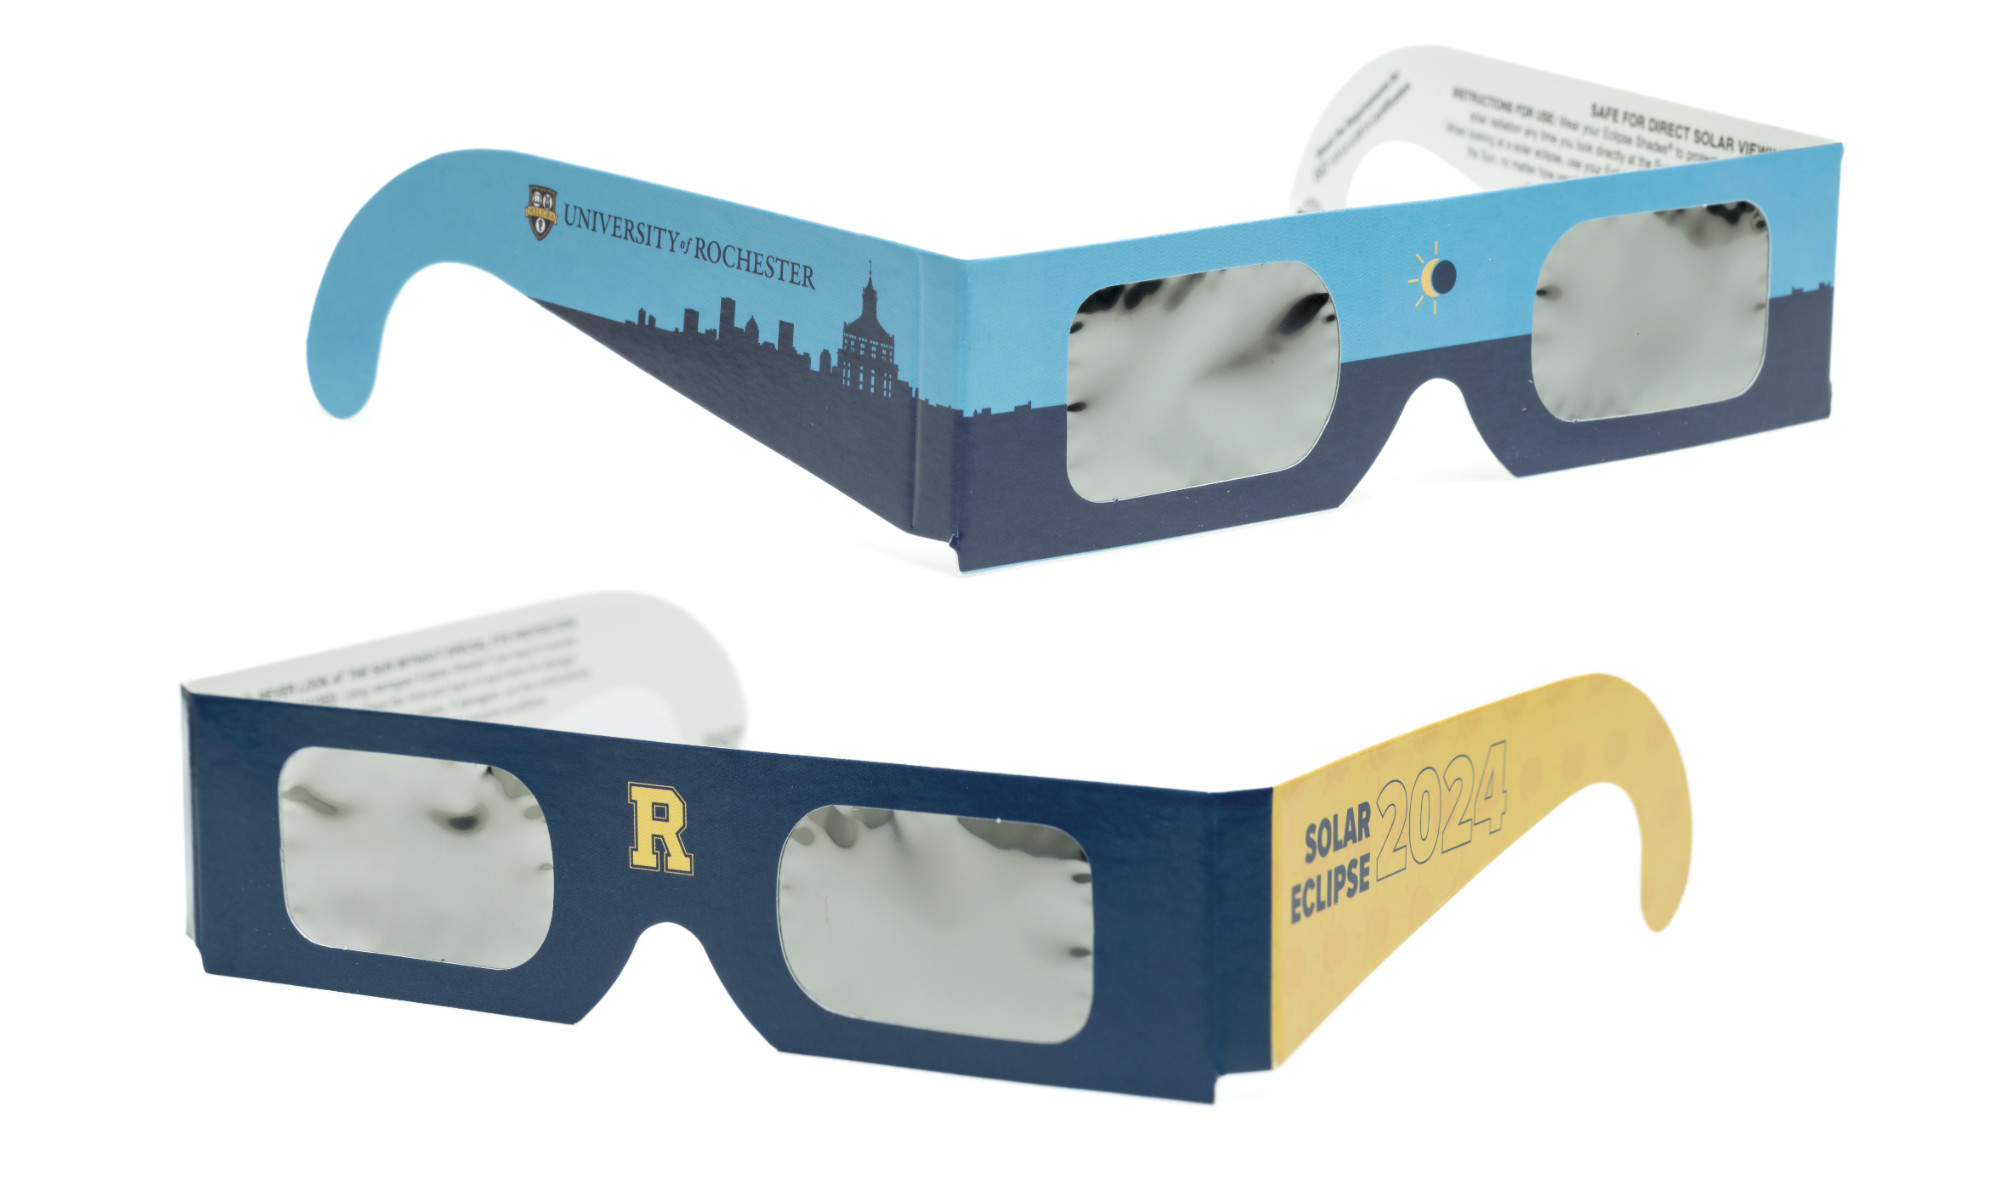 Two pairs of University of Rochester-branded solar eclipse glasses against a white background.